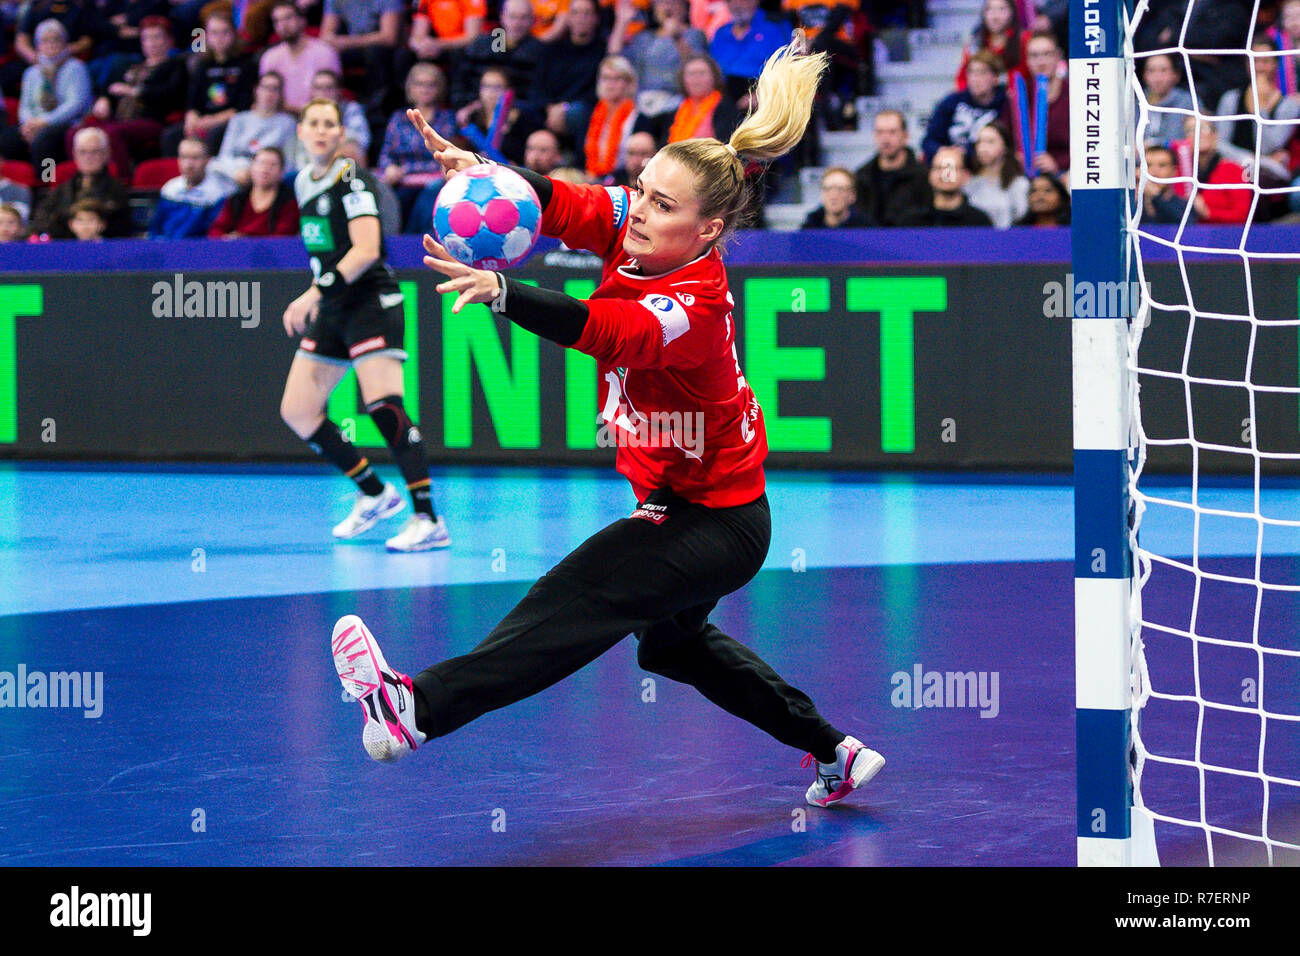 09 December 2018, France (France), Nancy: Handball, women: EM, Hungary - Germany Main Round, Group 2, 2nd Matchday at the Palais des Sports. Germany's goalkeeper Dinah Eckerle in action. Photo: Marco Wolf/wolf-sportfoto/dpa Stock Photo